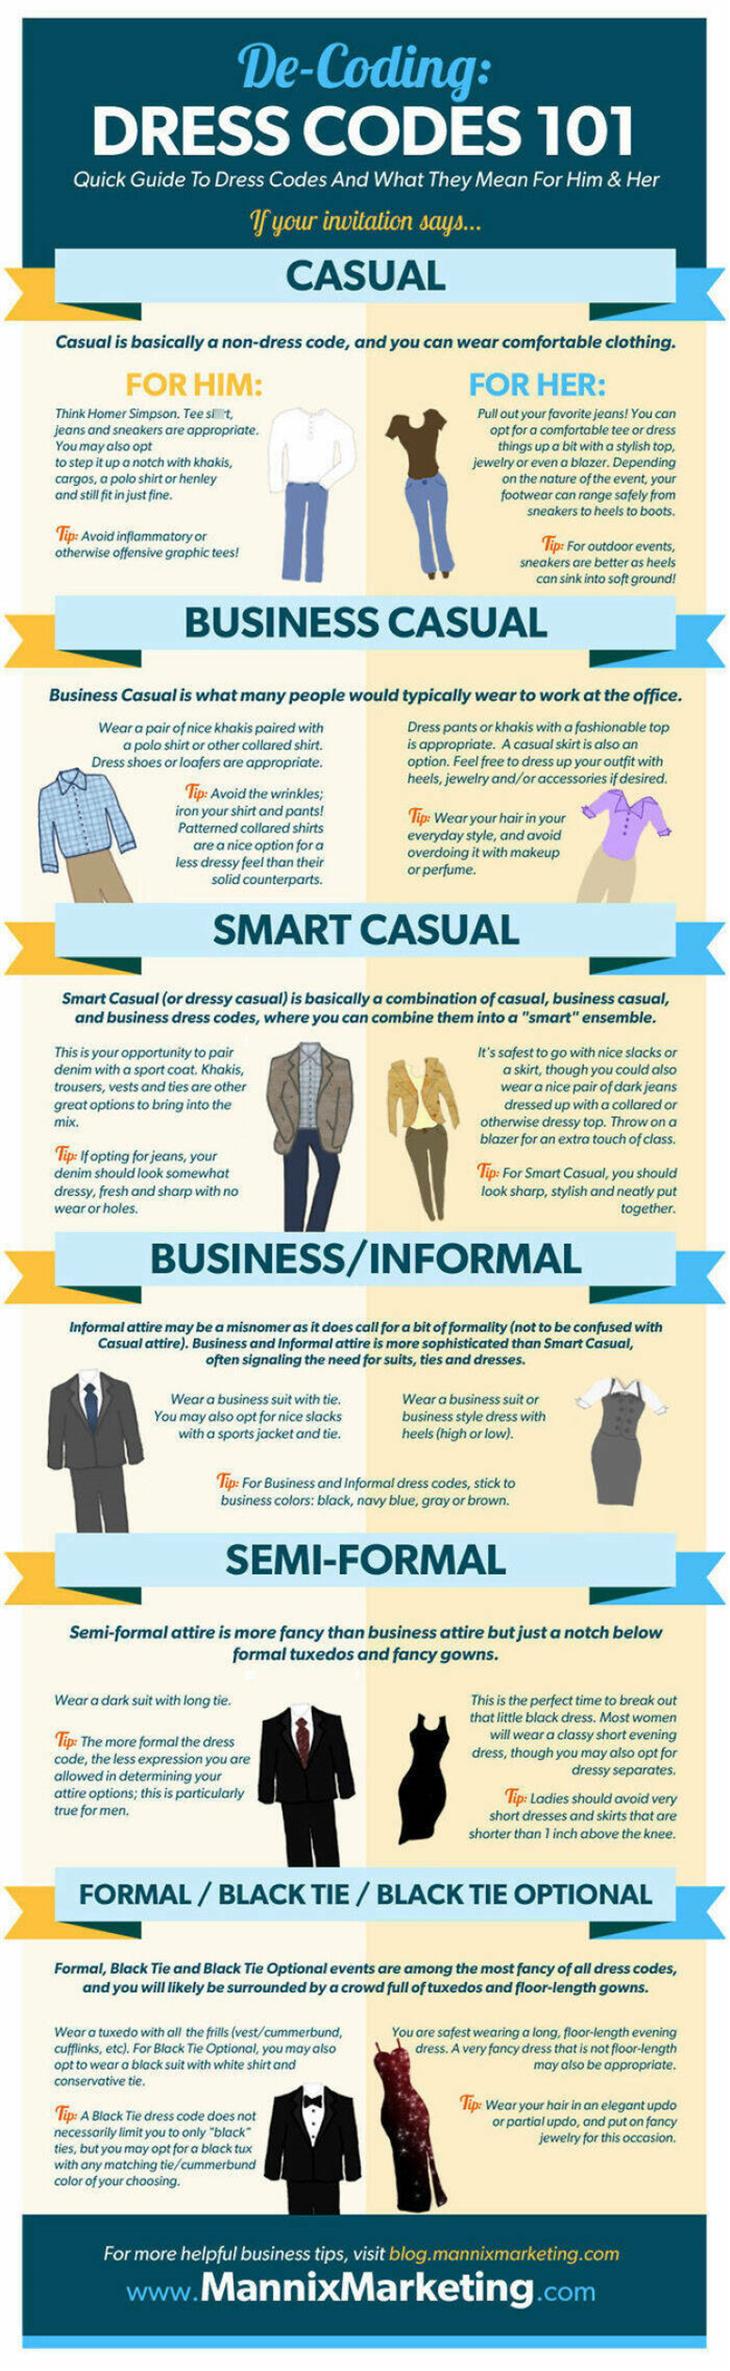 Clothing and Laundry Guide dress codes